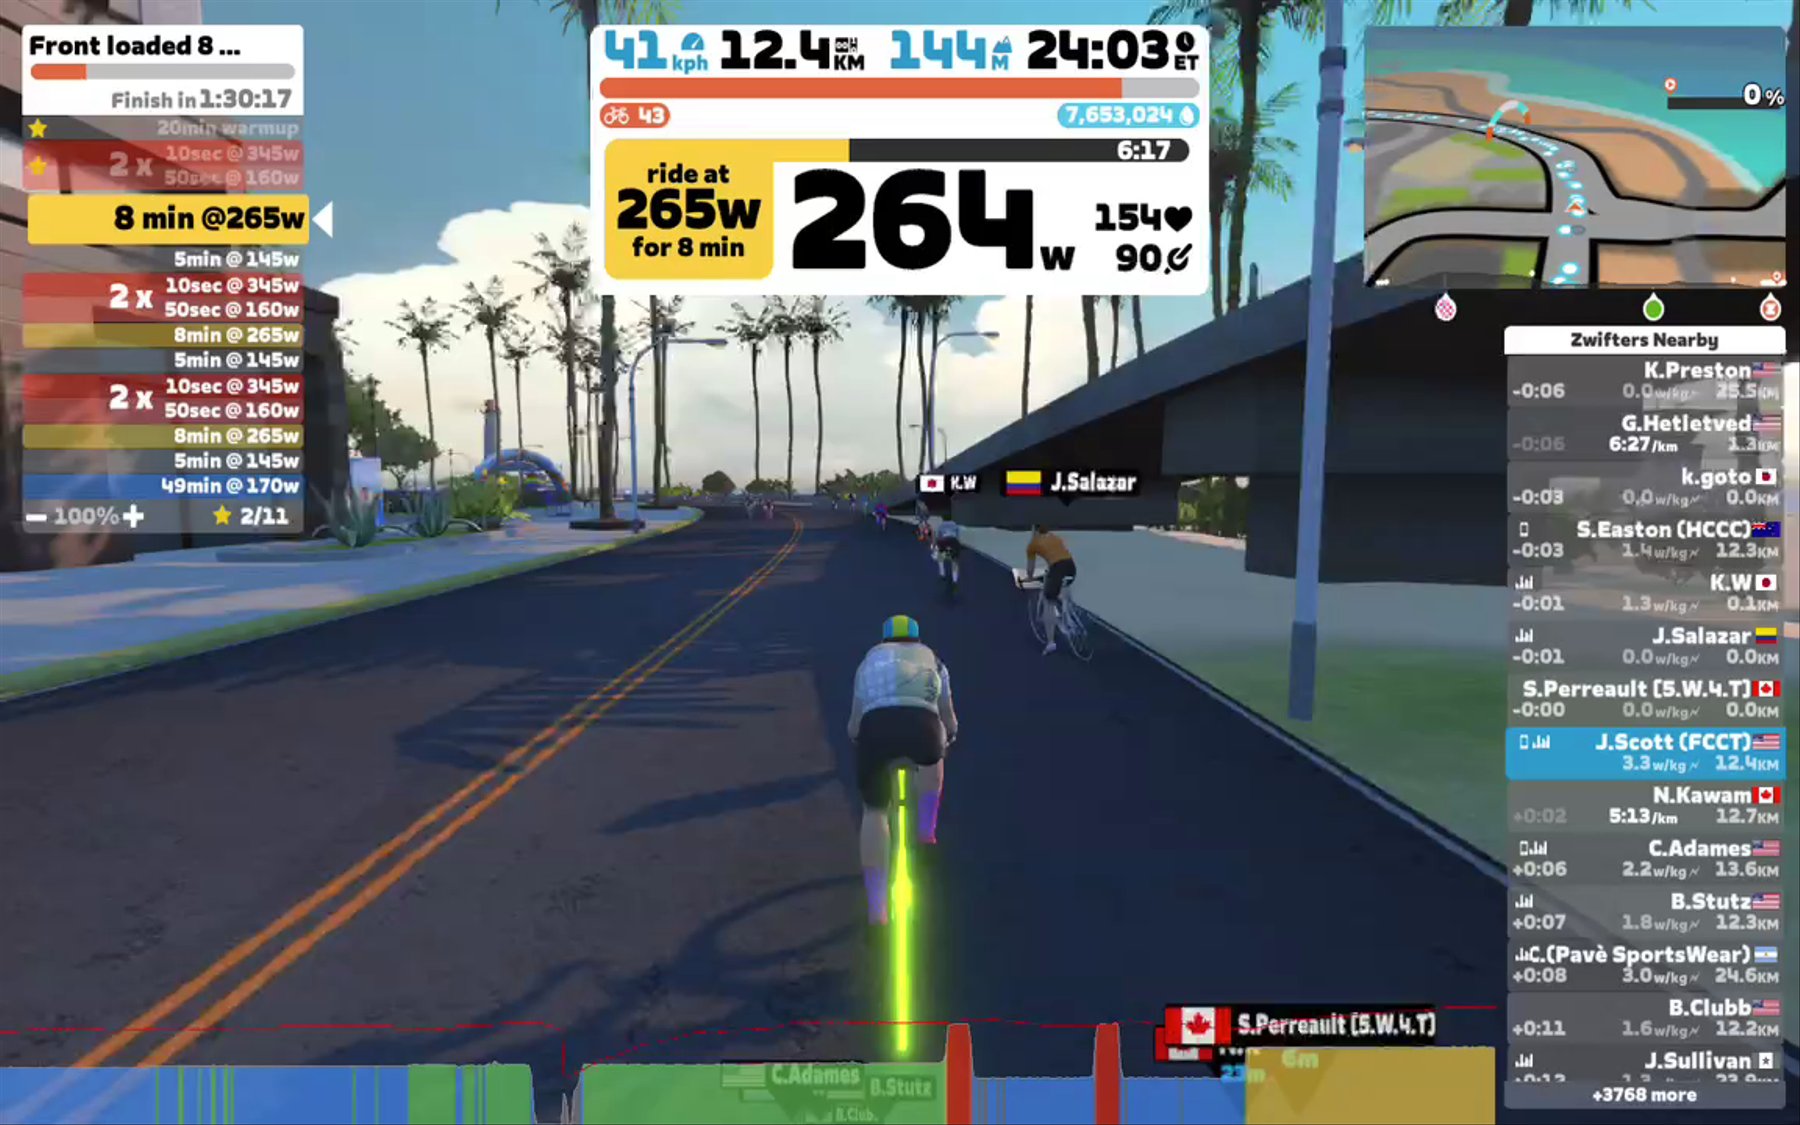 Zwift - Front loaded 8 minute threshold in Watopia